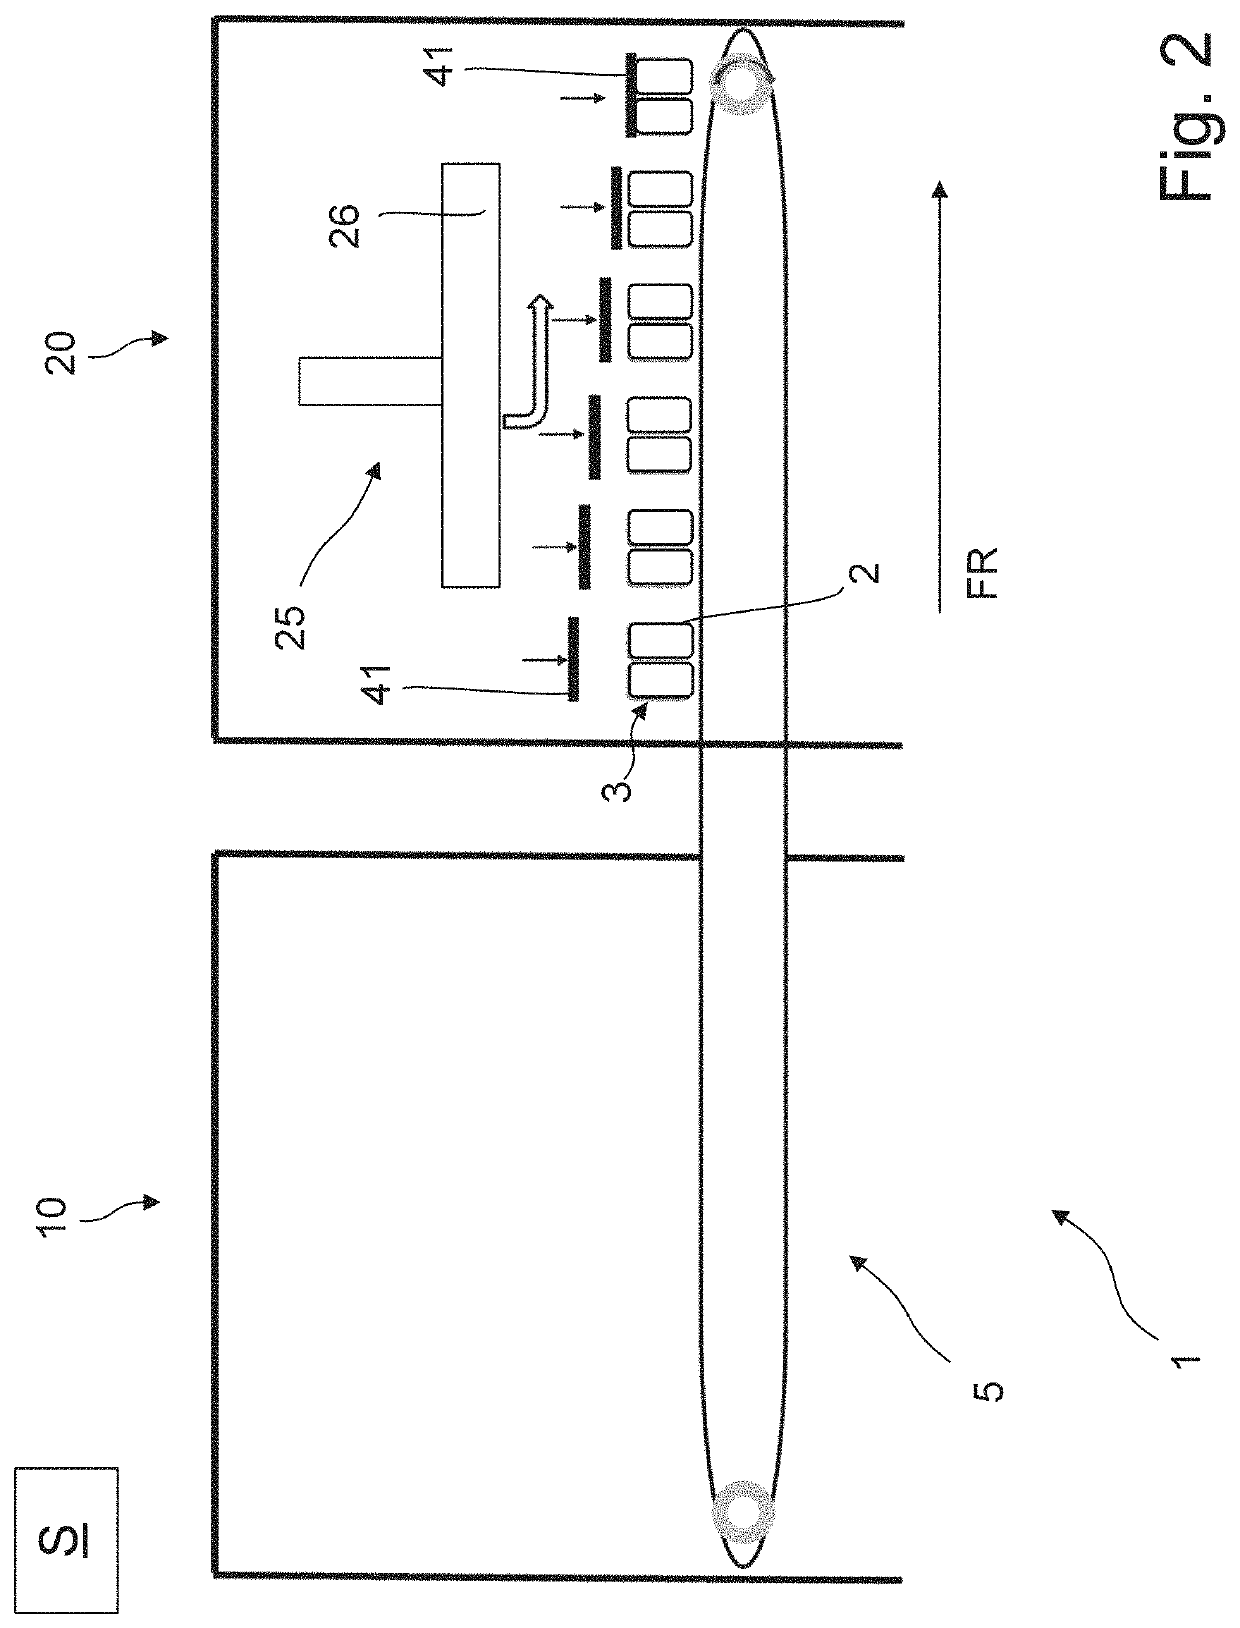 Method and apparatus for producing a multipack with several beverage containers